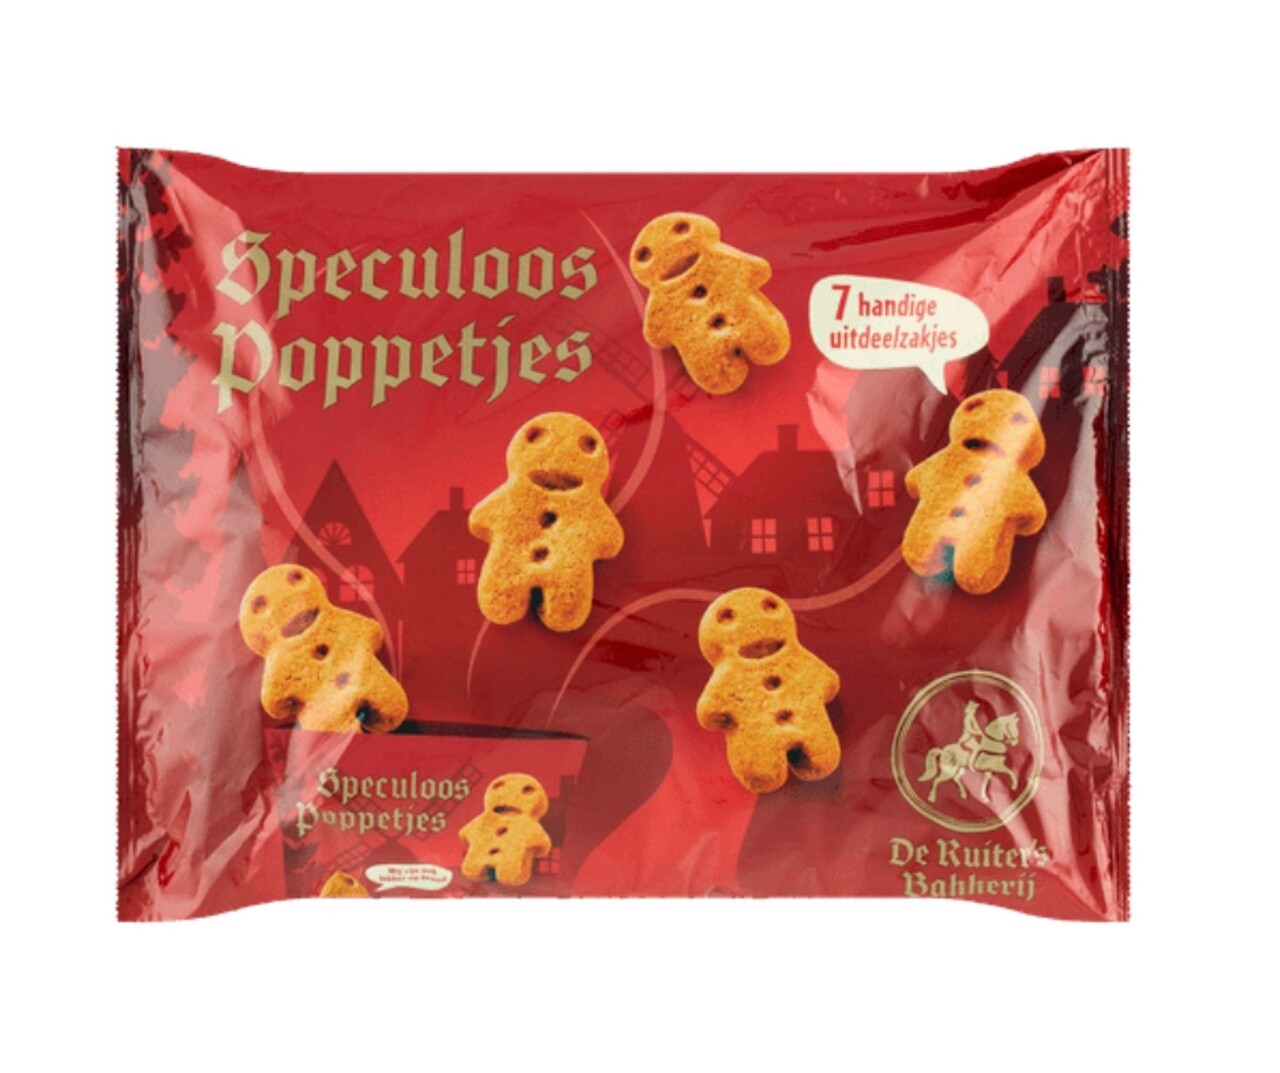 Spiced Biscuit Doll Mini (Speculoospoppetjes) 175g